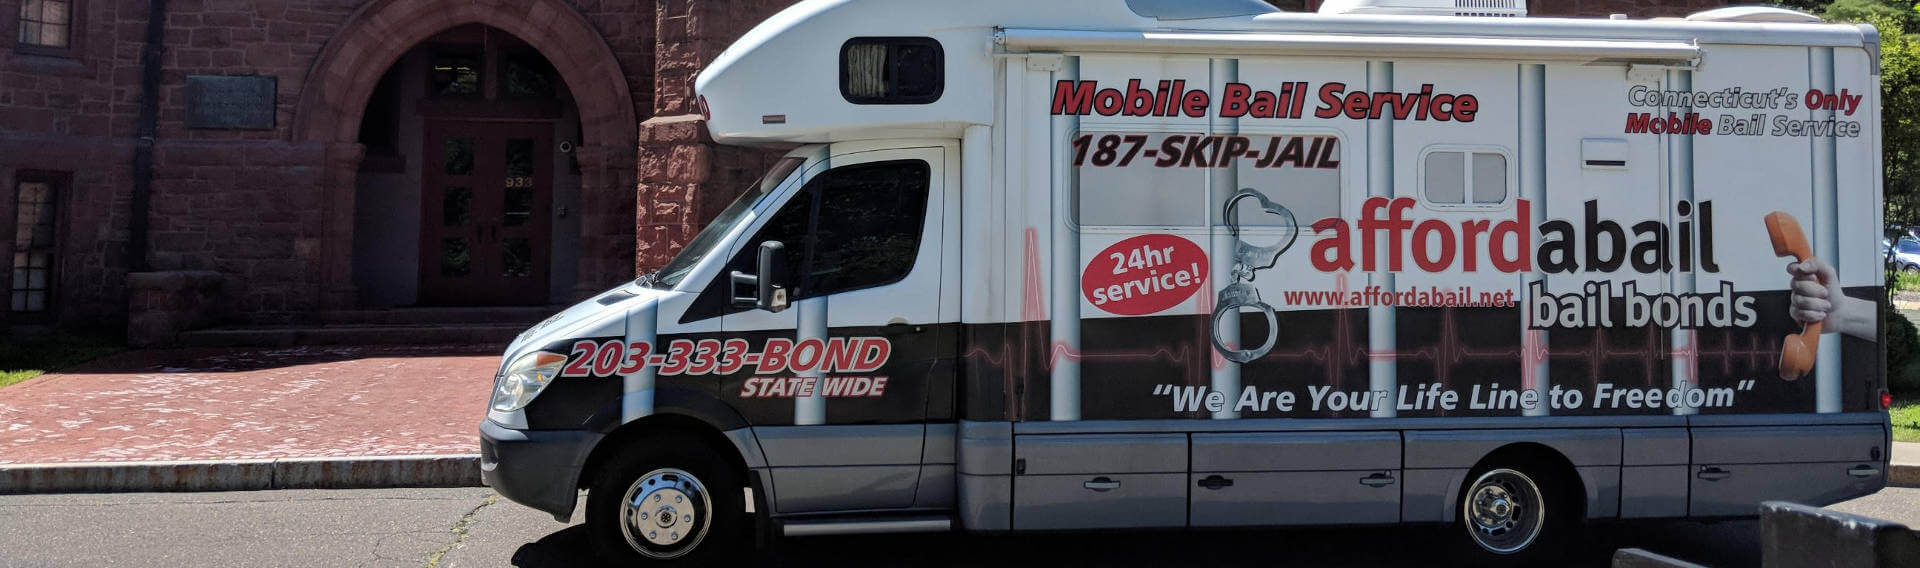 Mobile bail bonds service in East Haven CT